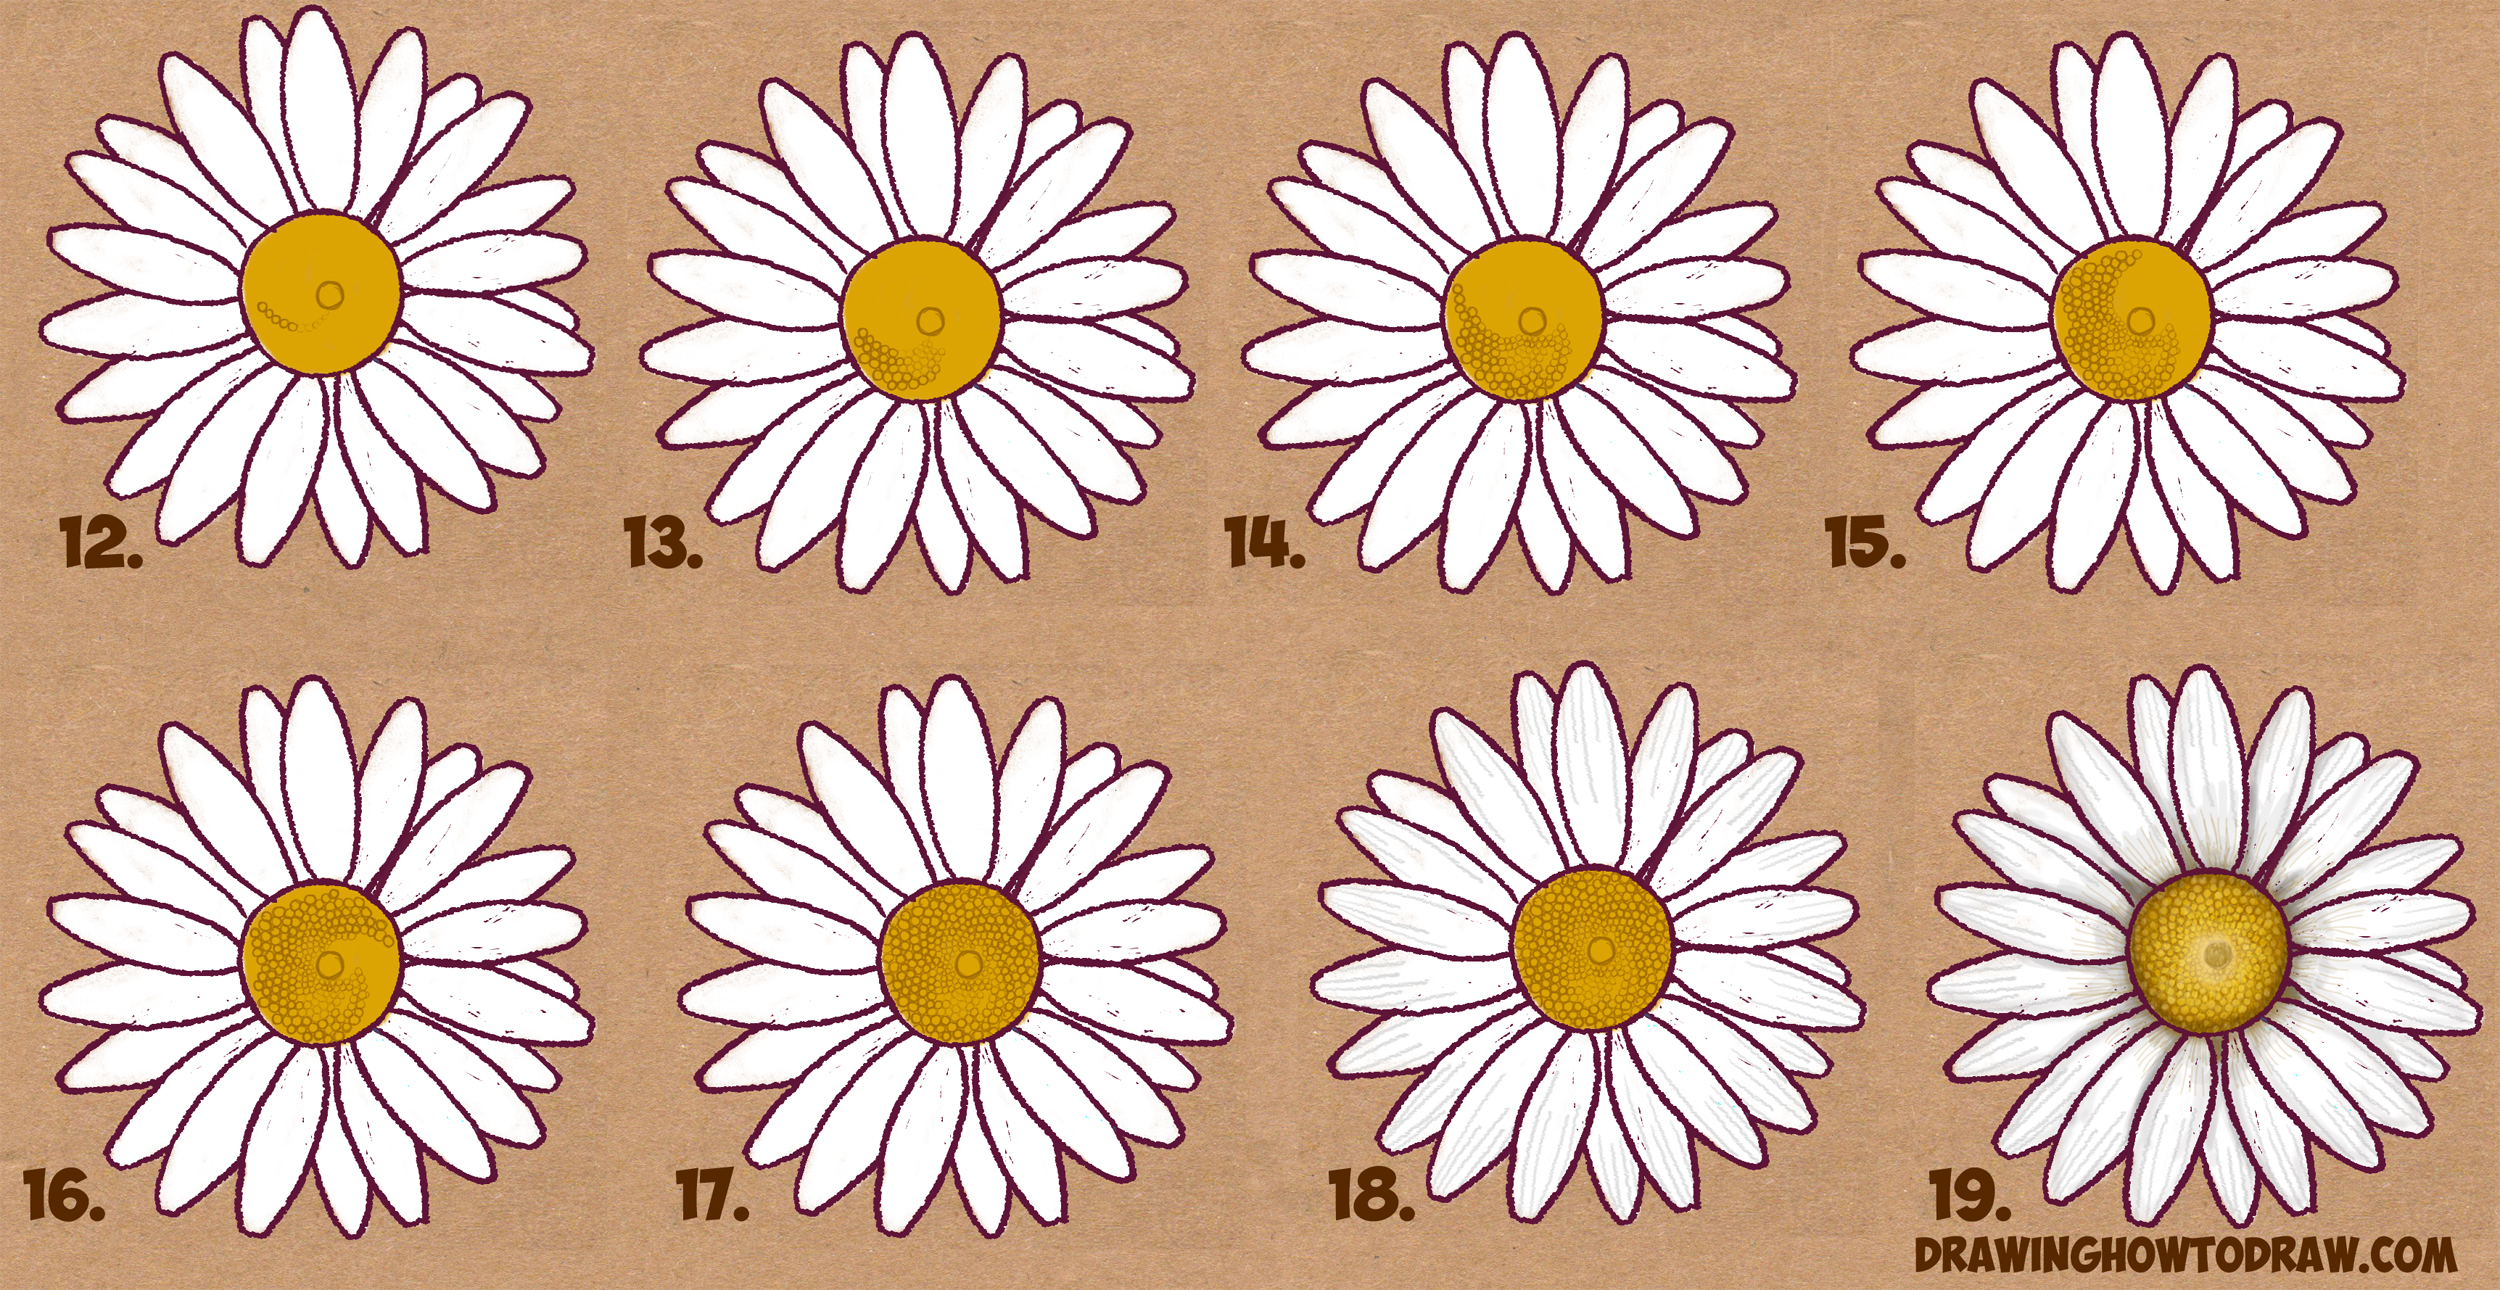 How to Draw a Daisy Flower (Daisies) in Easy Step by Step Drawing ...